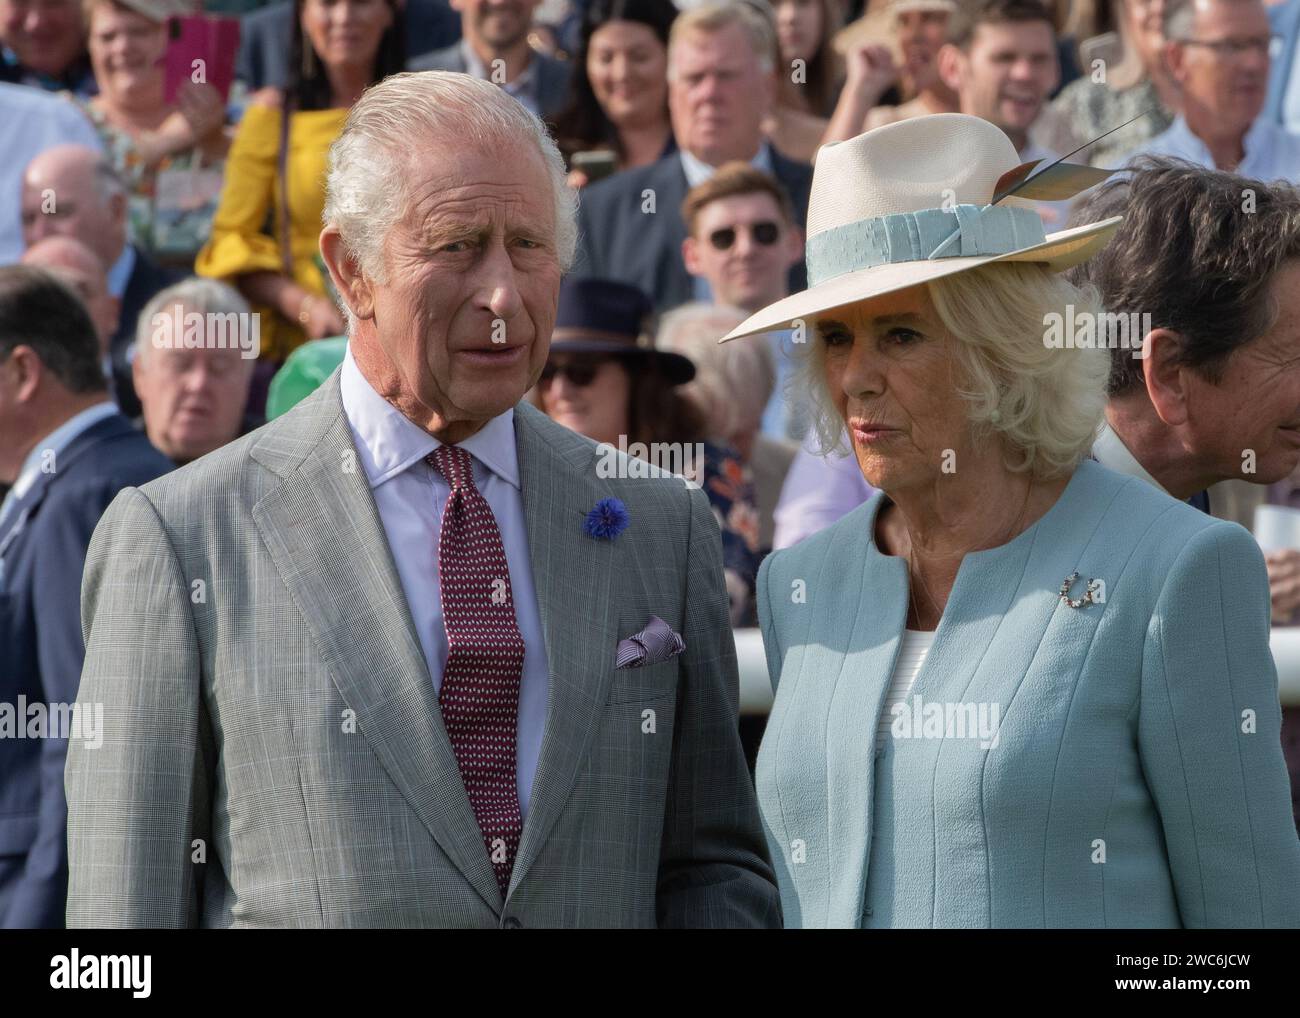 HM The King & HM The Queen at Doncaster Racecourse - St Leger 2023 - Desert Hero - Tom Marquand - William Haggas Stock Photo